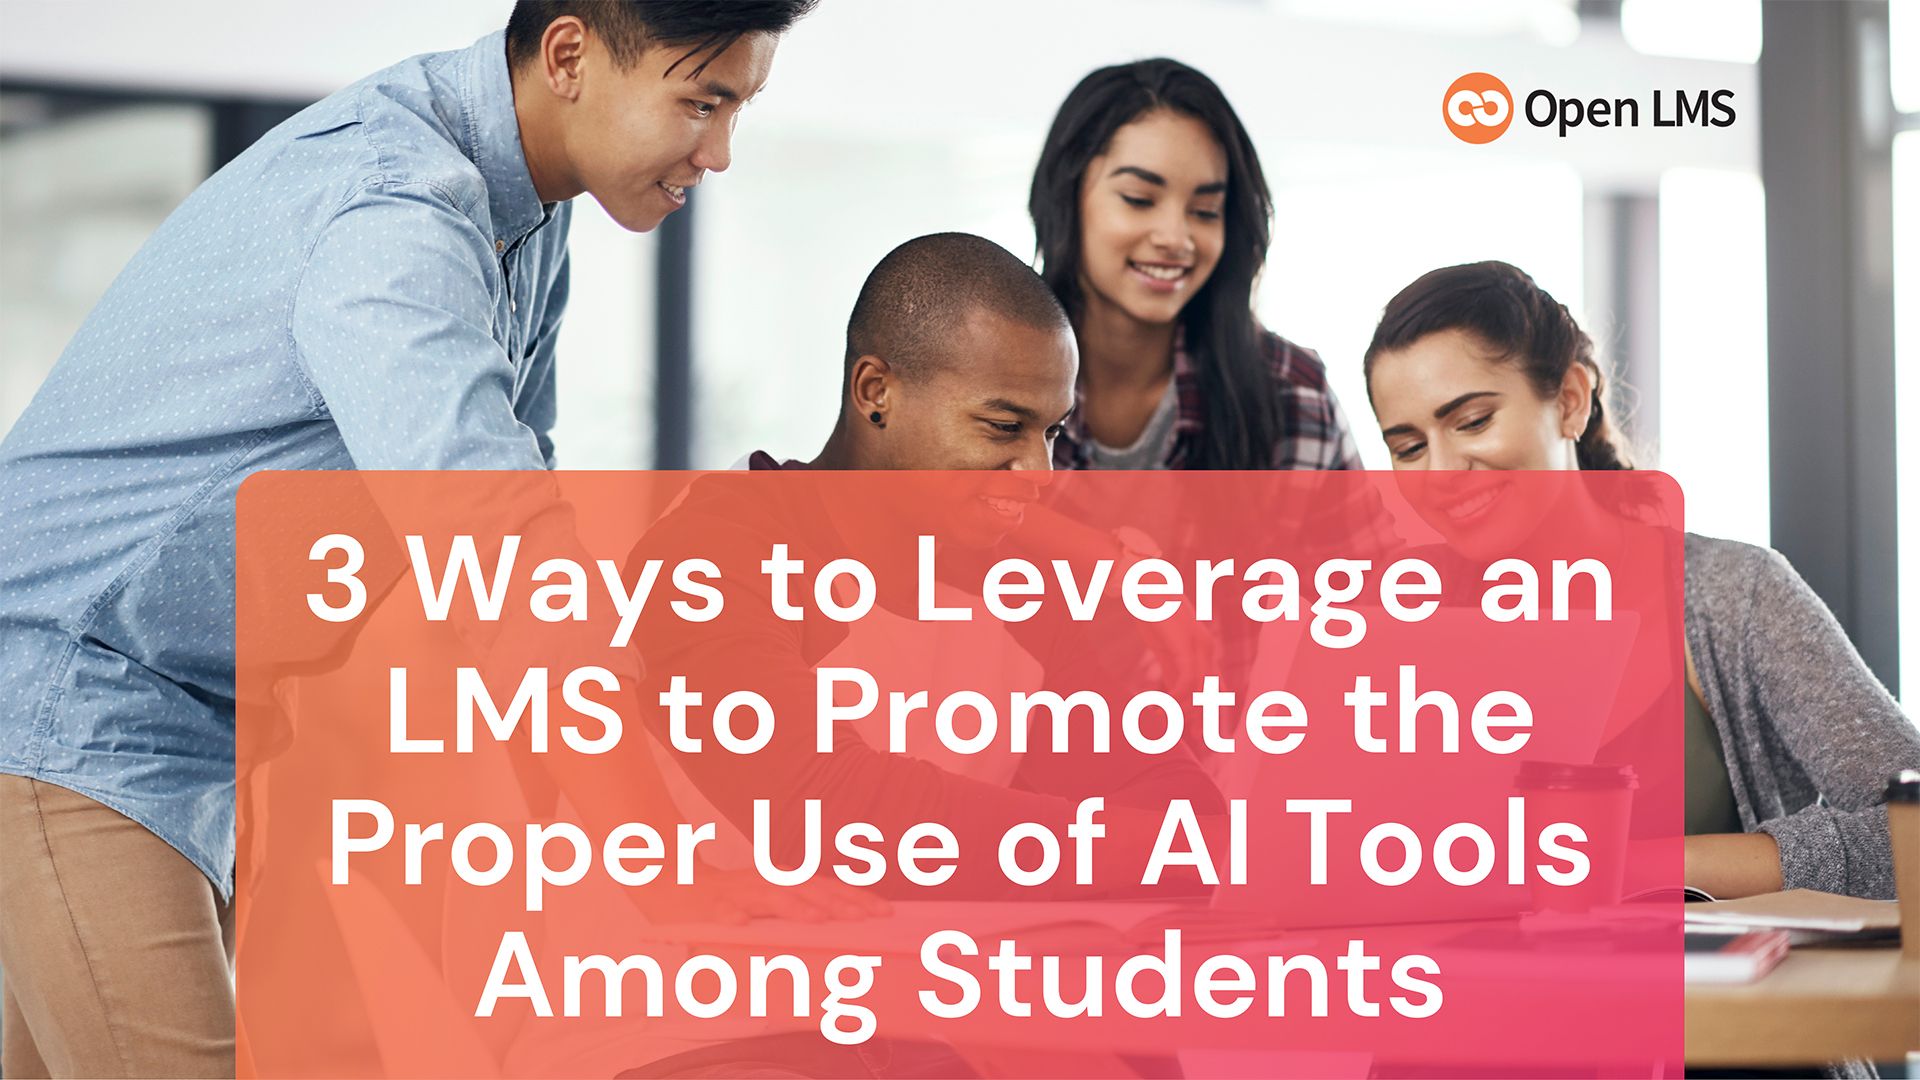 3 Ways to Leverage an LMS to Promote the Proper Use of AI Tools Among Students